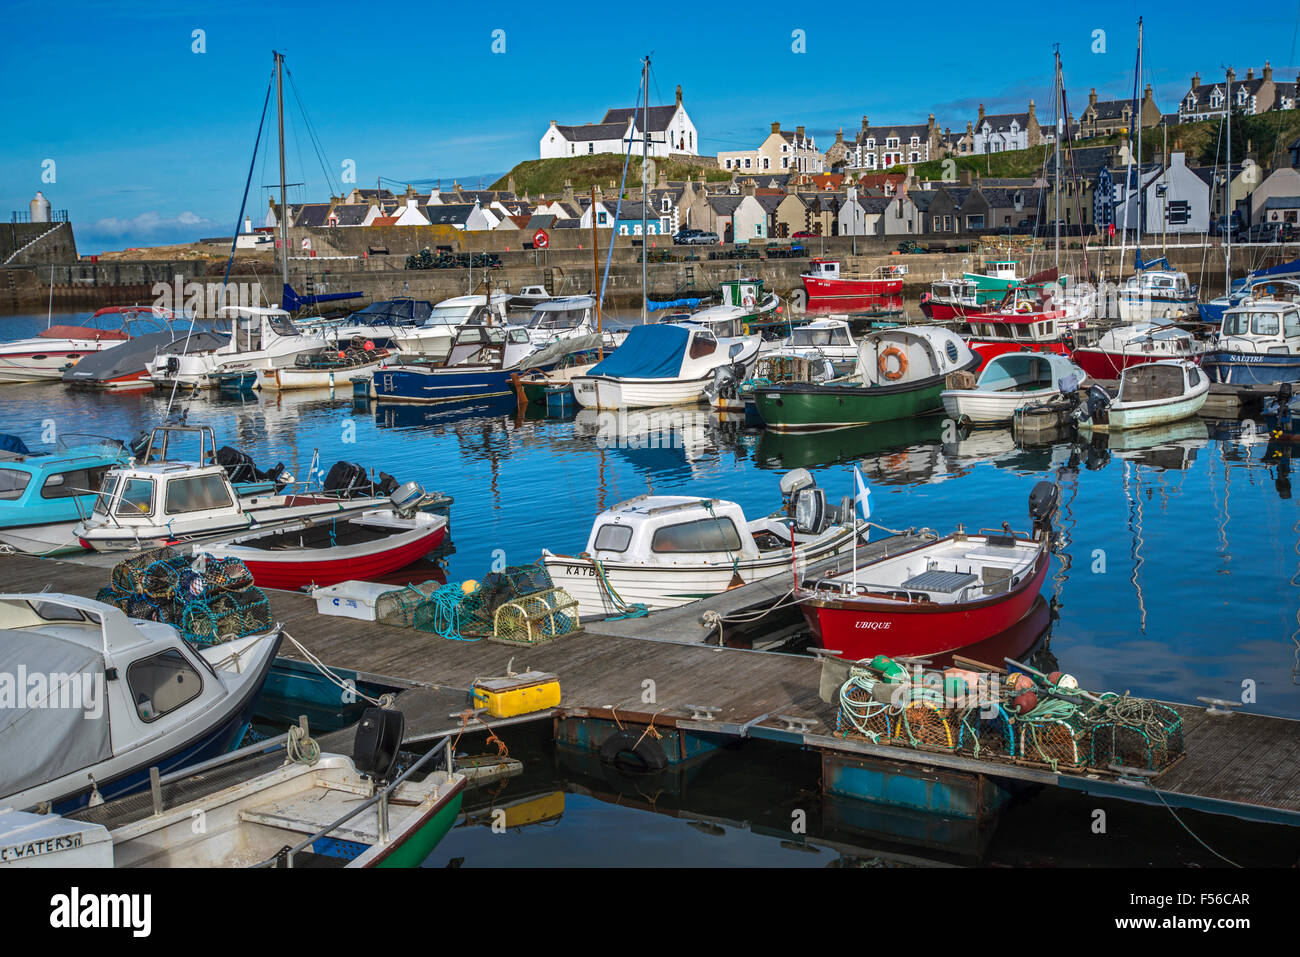 View of the Marina at Findochty on the Moray Firth, with the church and fishermen's cottages in the background. Stock Photo